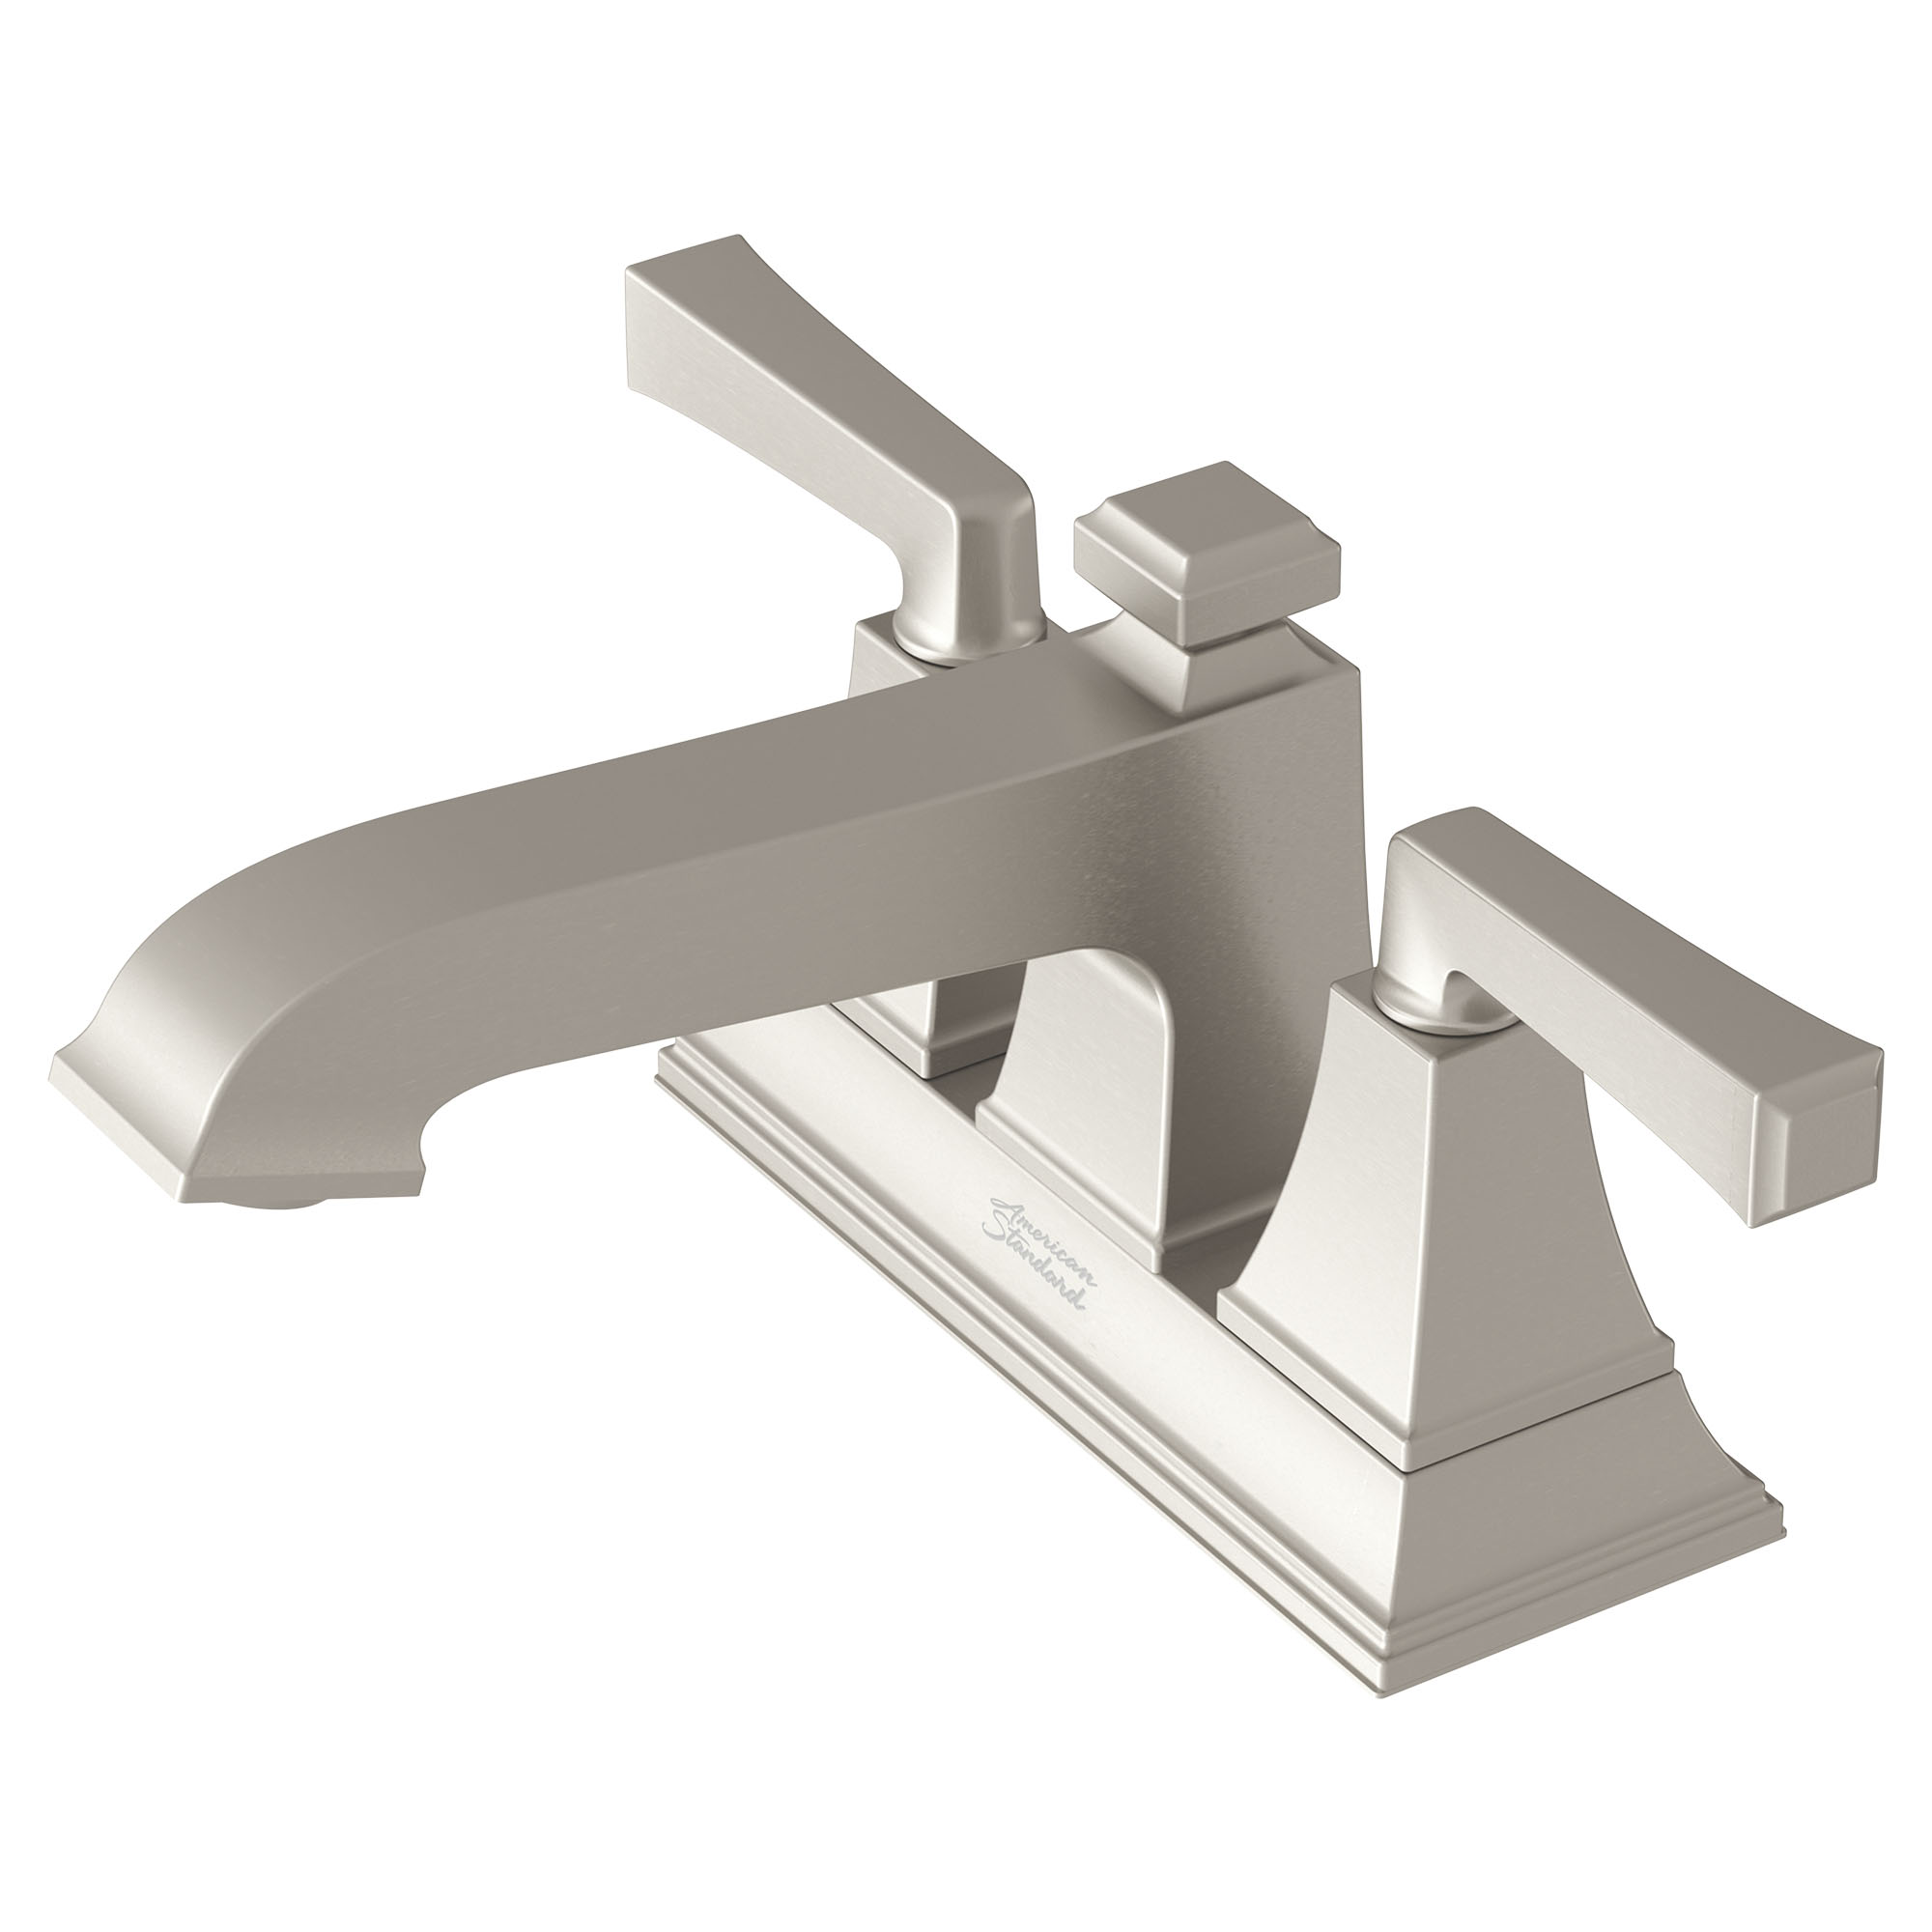 Town Square™ S 4-Inch Centerset 2-Handle Bathroom Faucet 1.2 gpm/4.5 L/min With Lever Handles